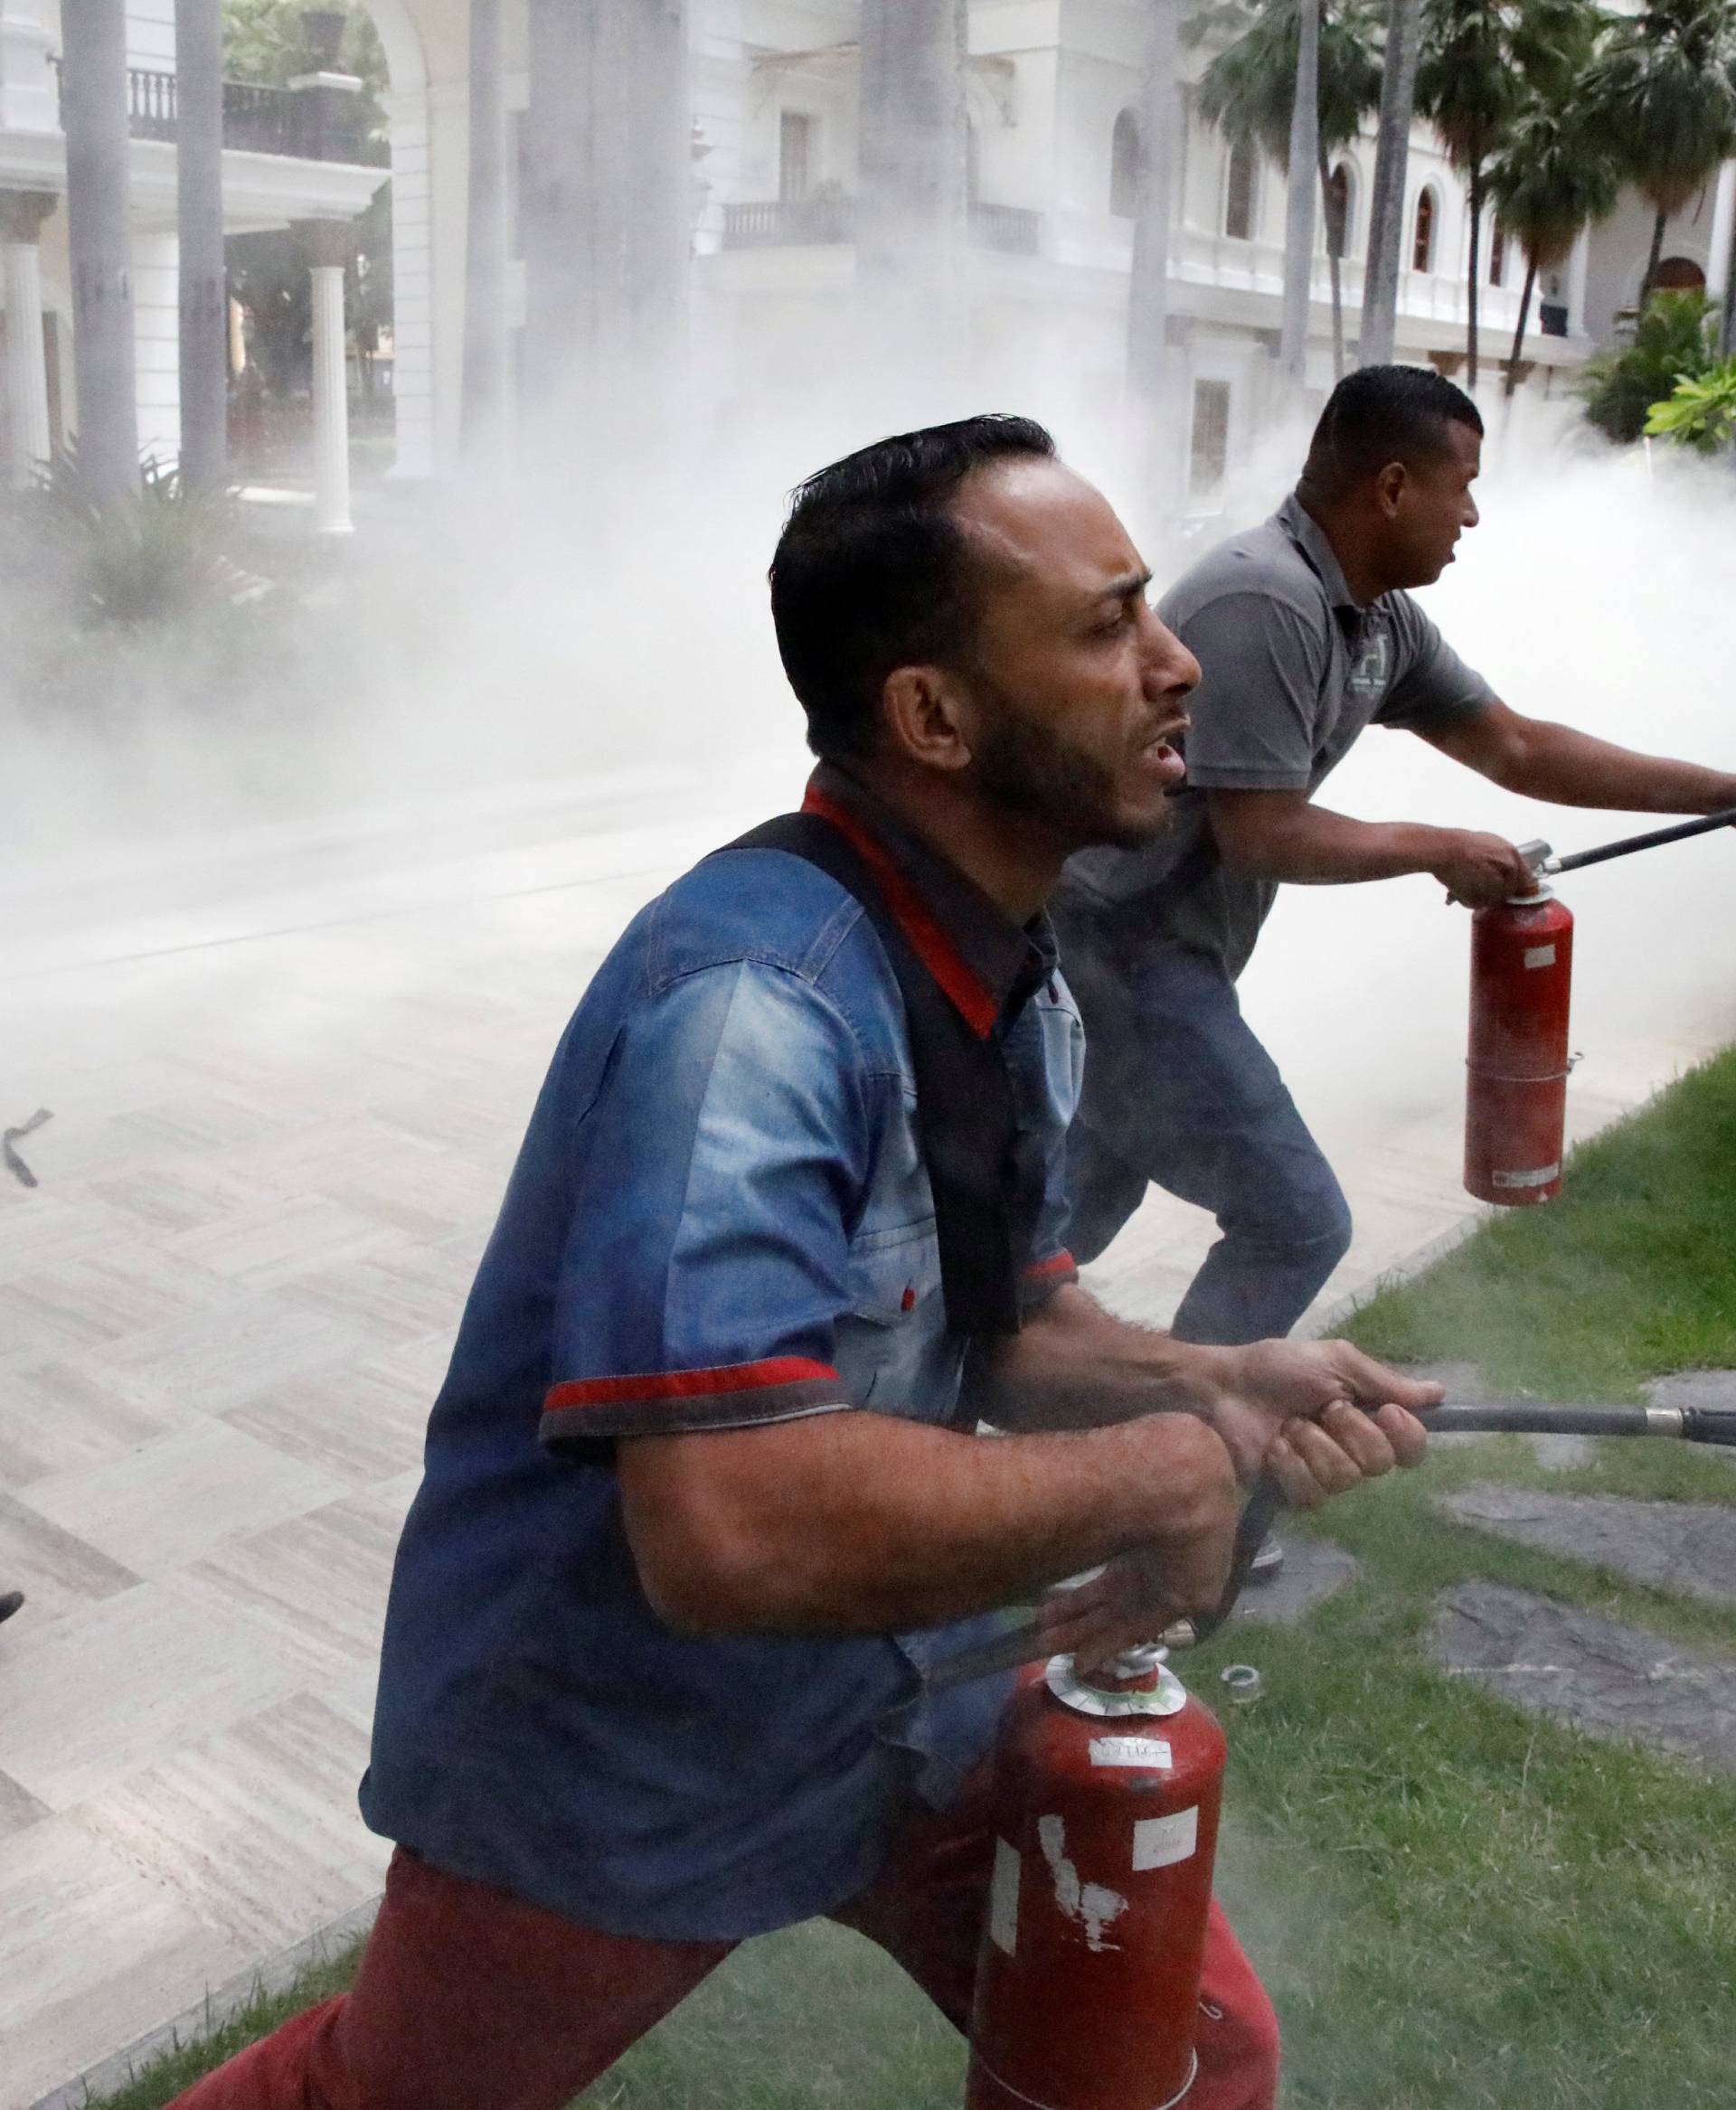 People use fire extinguishers during clashes with government supporters outside the National Assembly, in Caracas